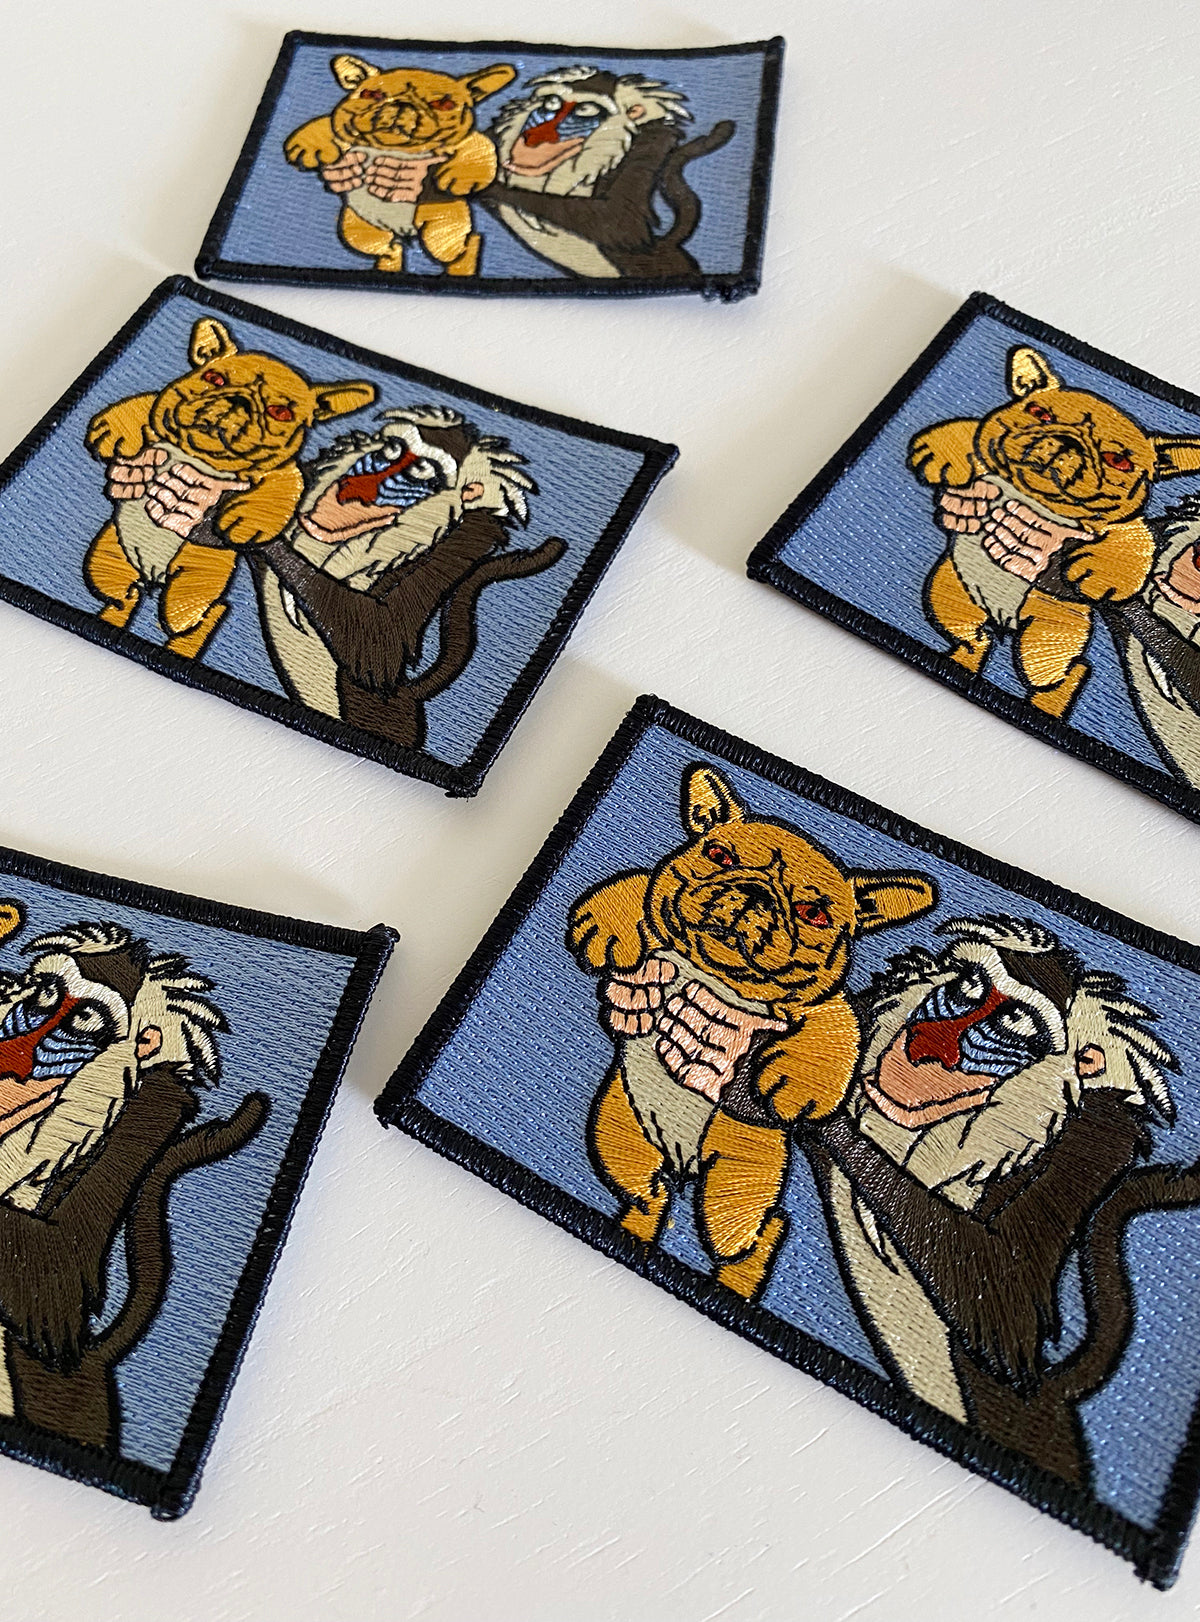 Lion King Patch